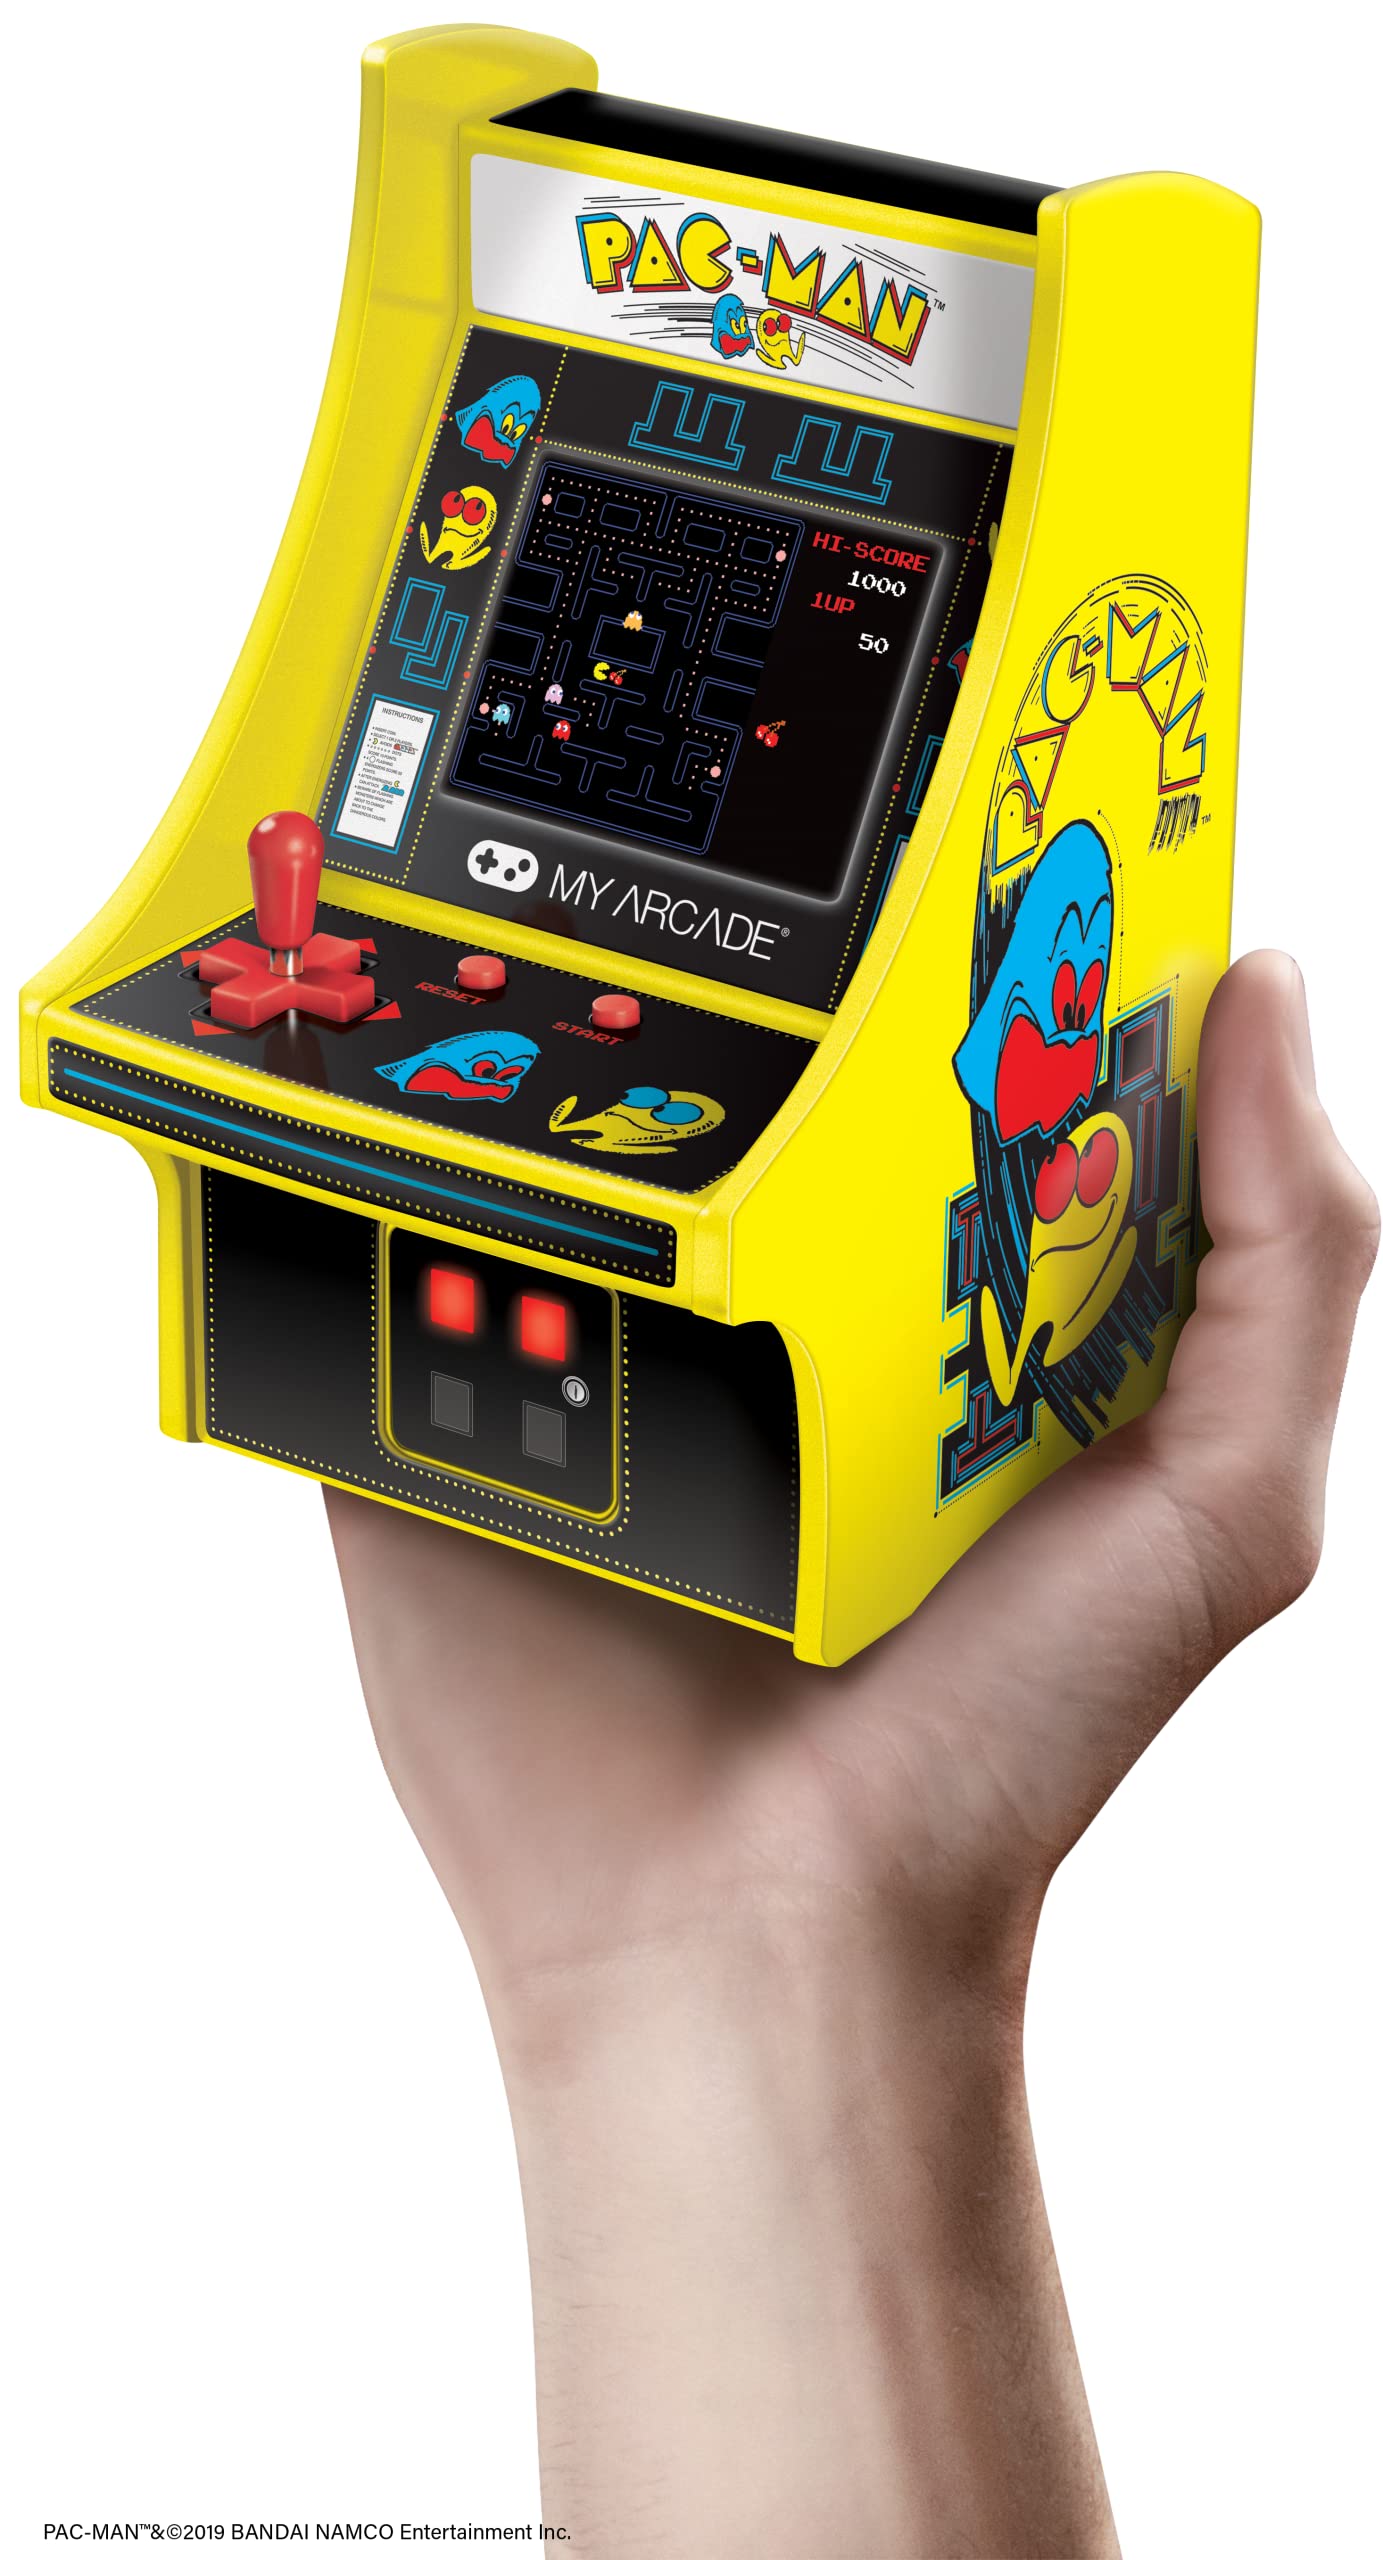 My Arcade Micro Player Mini Arcade Machine: Bubble Bobble Video Game, Fully Playable, 6.75 Inch Collectible, Color Display & Micro Player Mini Arcade Machine: Pac-Man Video Game, 6.75 Inch Collectible